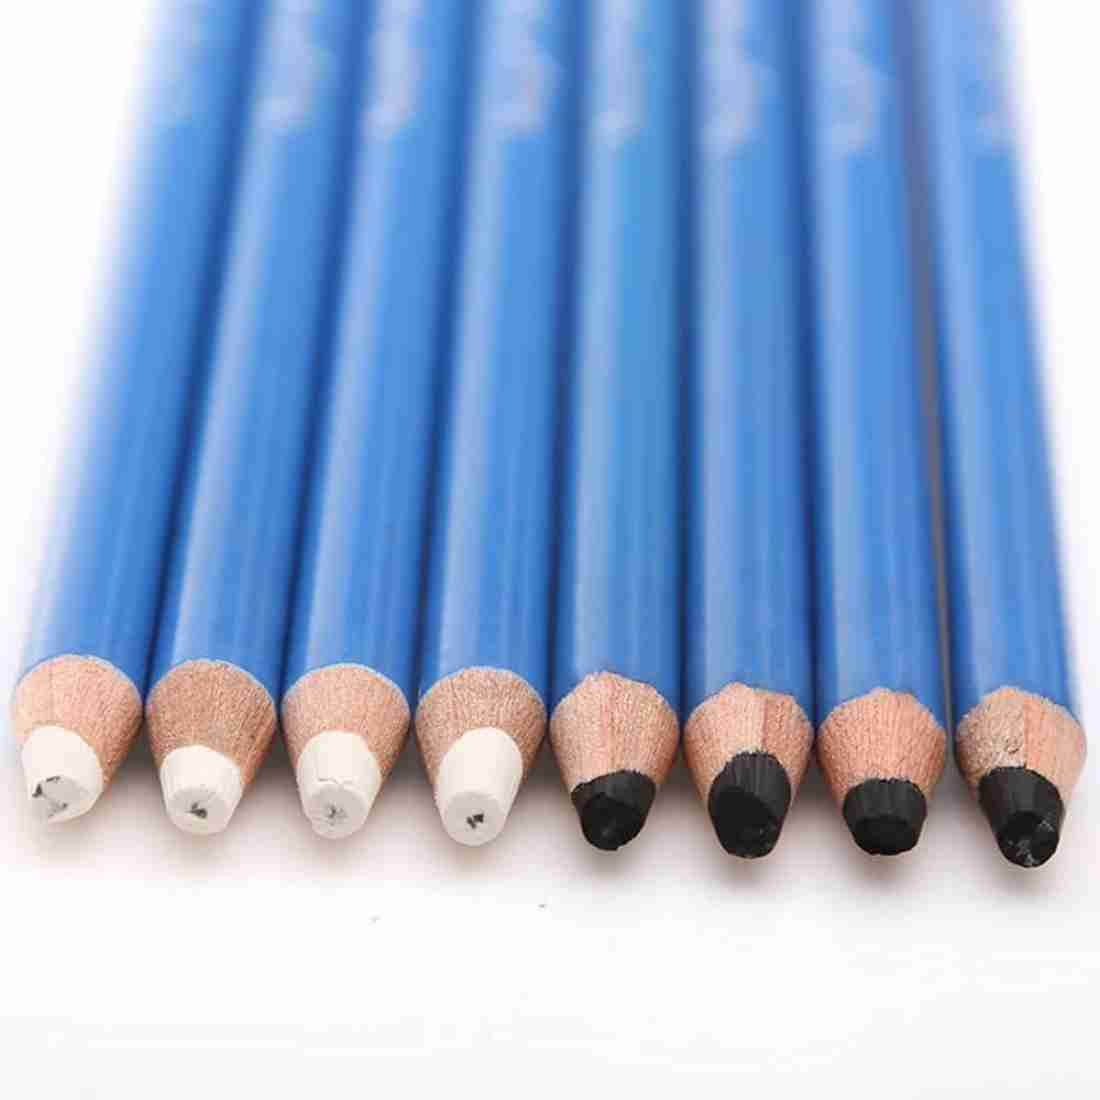 Rk 3 Pcs White Medium Charcoal Art Drawing Pencils Set,  Sketching Pencils for Dark or Tinted Paper round Shaped Color Pencils 